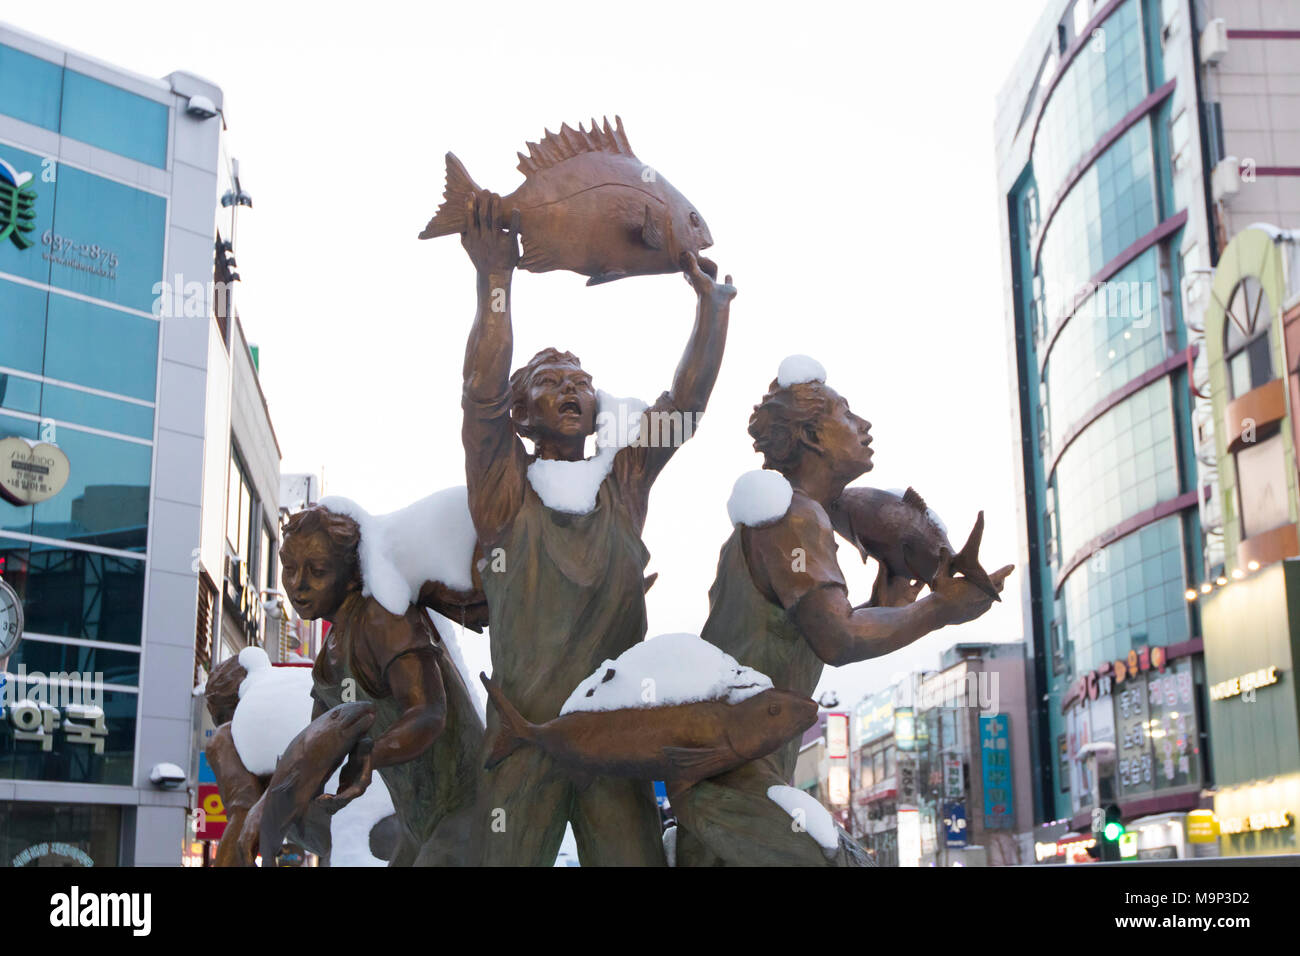 A monument for fishermen in the center of Sokcho, a vivid harbour town between the mountains and the sea of South Korean region Gangwon-do. Nearby Pyeongchang will host the Winter Olympics in February 2018. Stock Photo